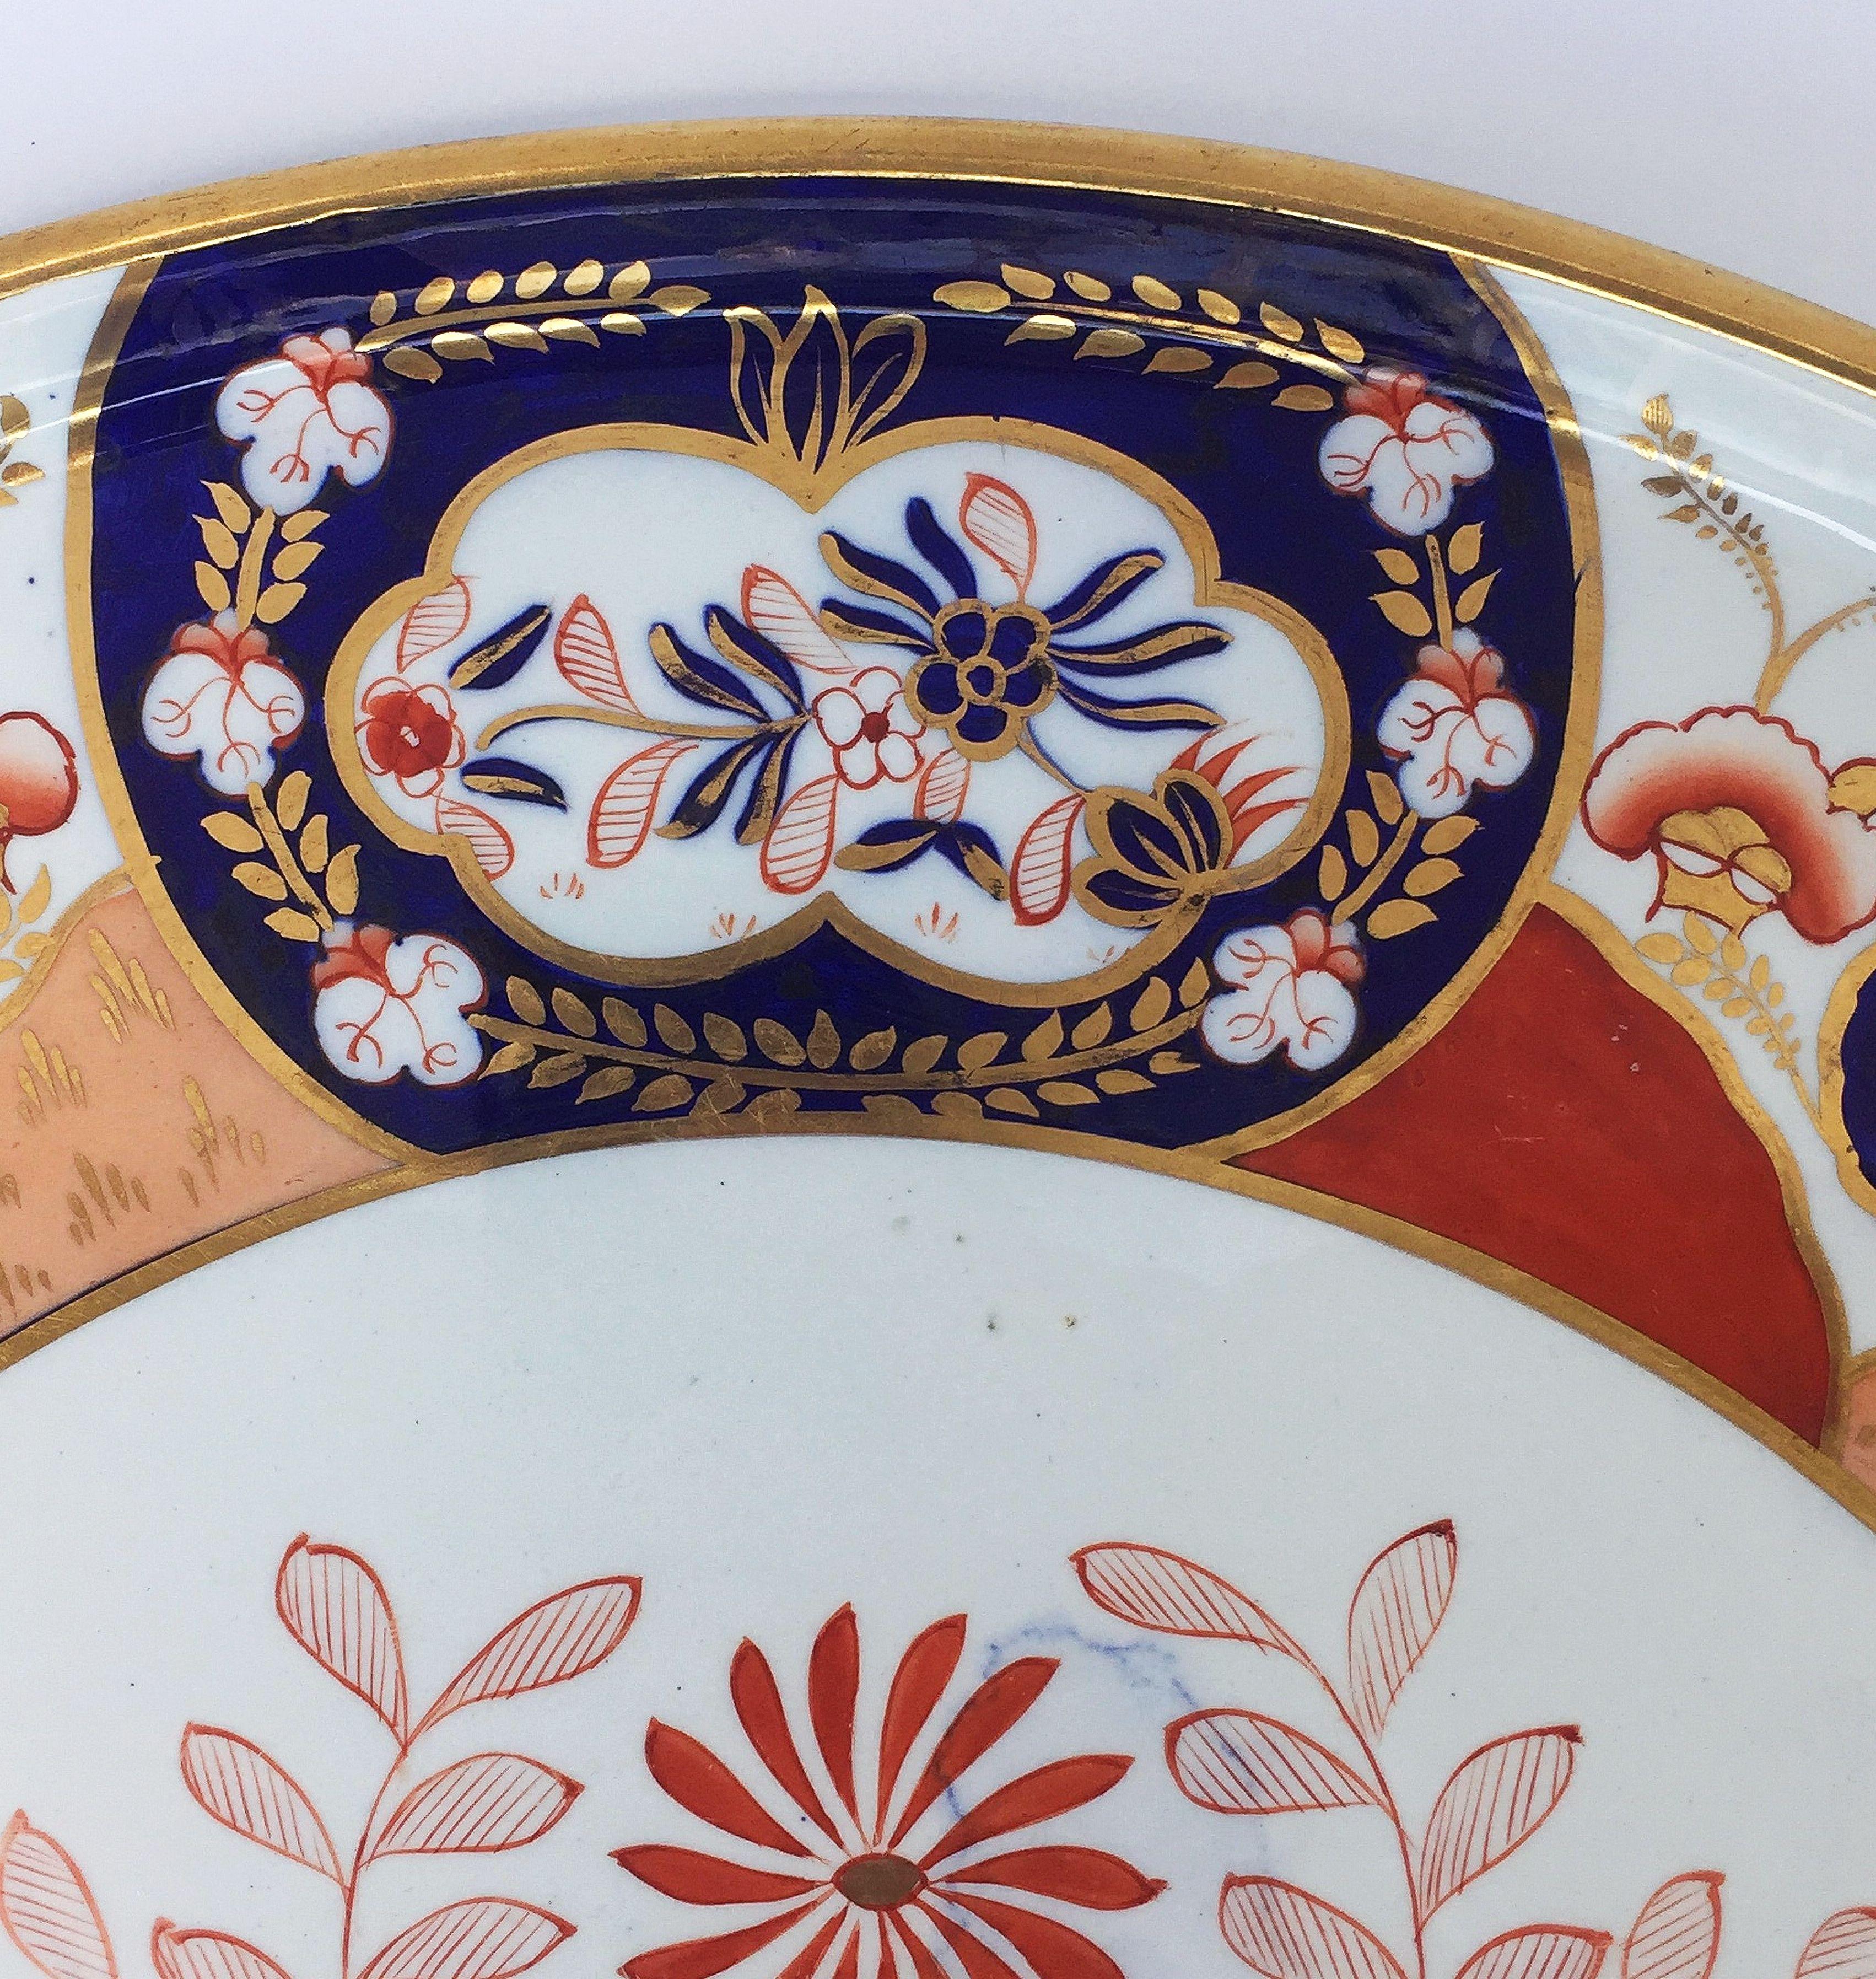 Glazed Large 19th c. English Imari Polychrome Charger with Gilt Accents by Copeland For Sale